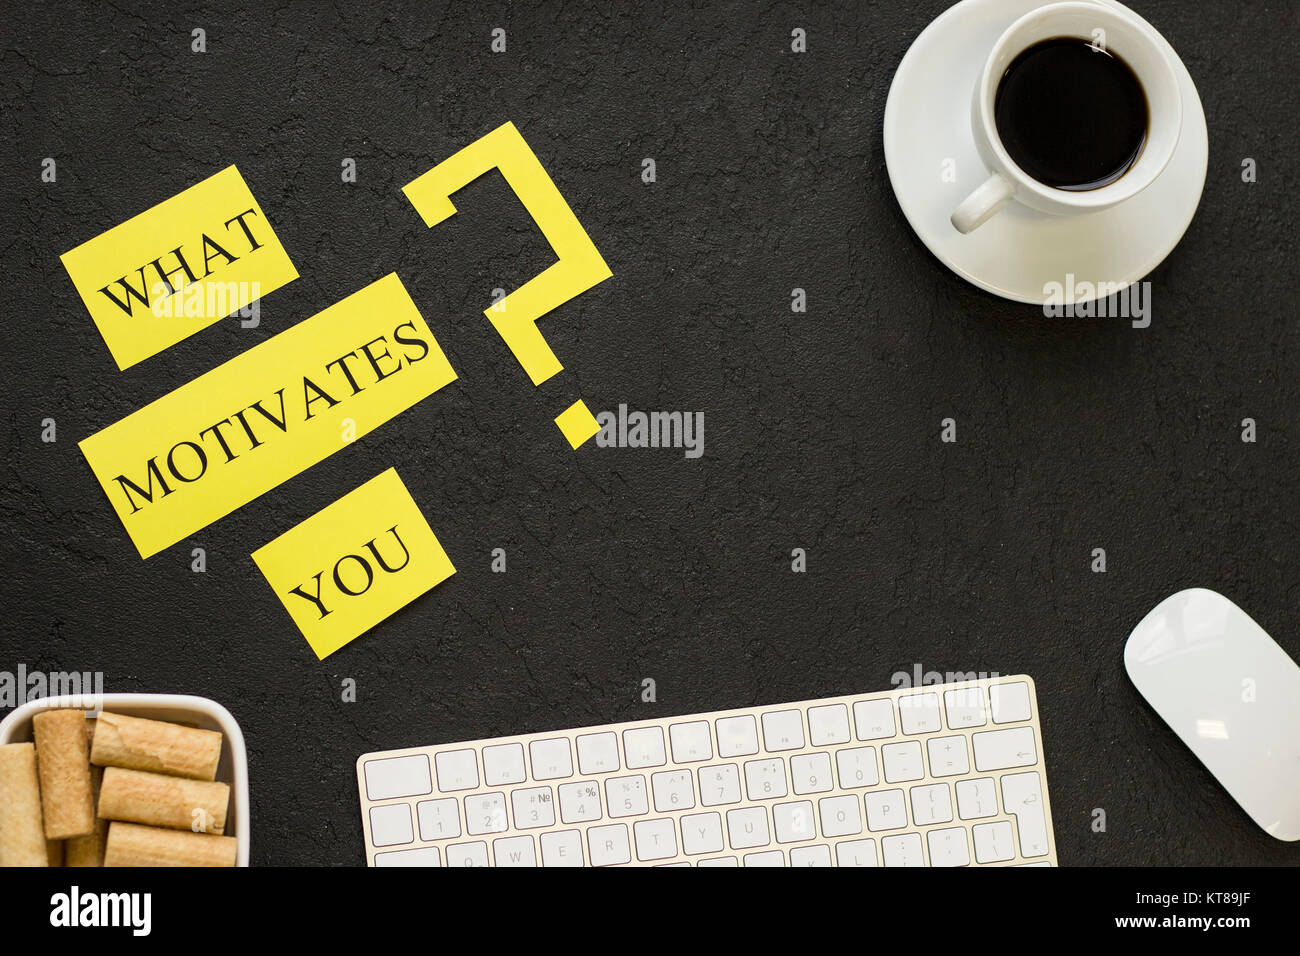 What motivates you question printed on a yellow paper with coffee, cookies and office items. Black concrete background. Business and management concep Stock Photo